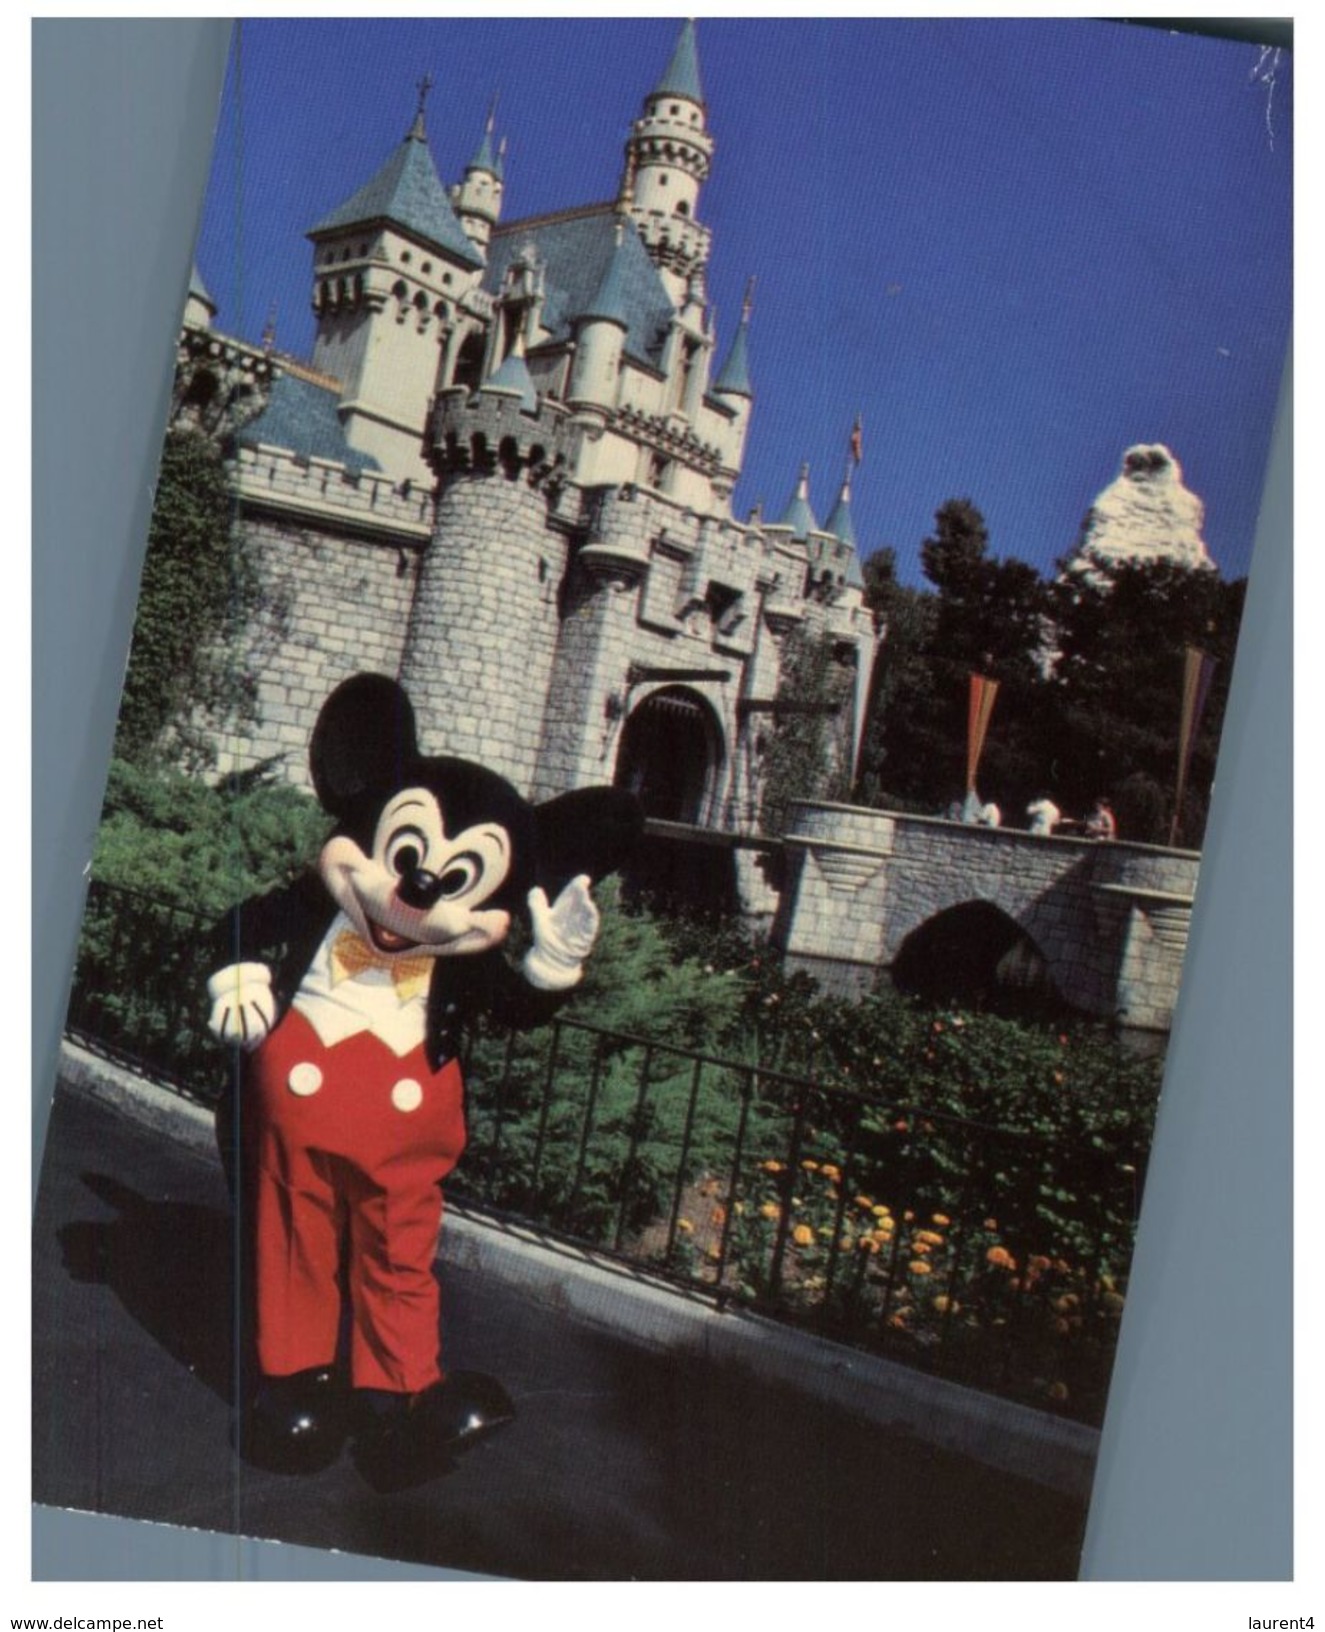 (PF 210) Sleeping Beauty Castle And Mickey Mouse - Disneyland